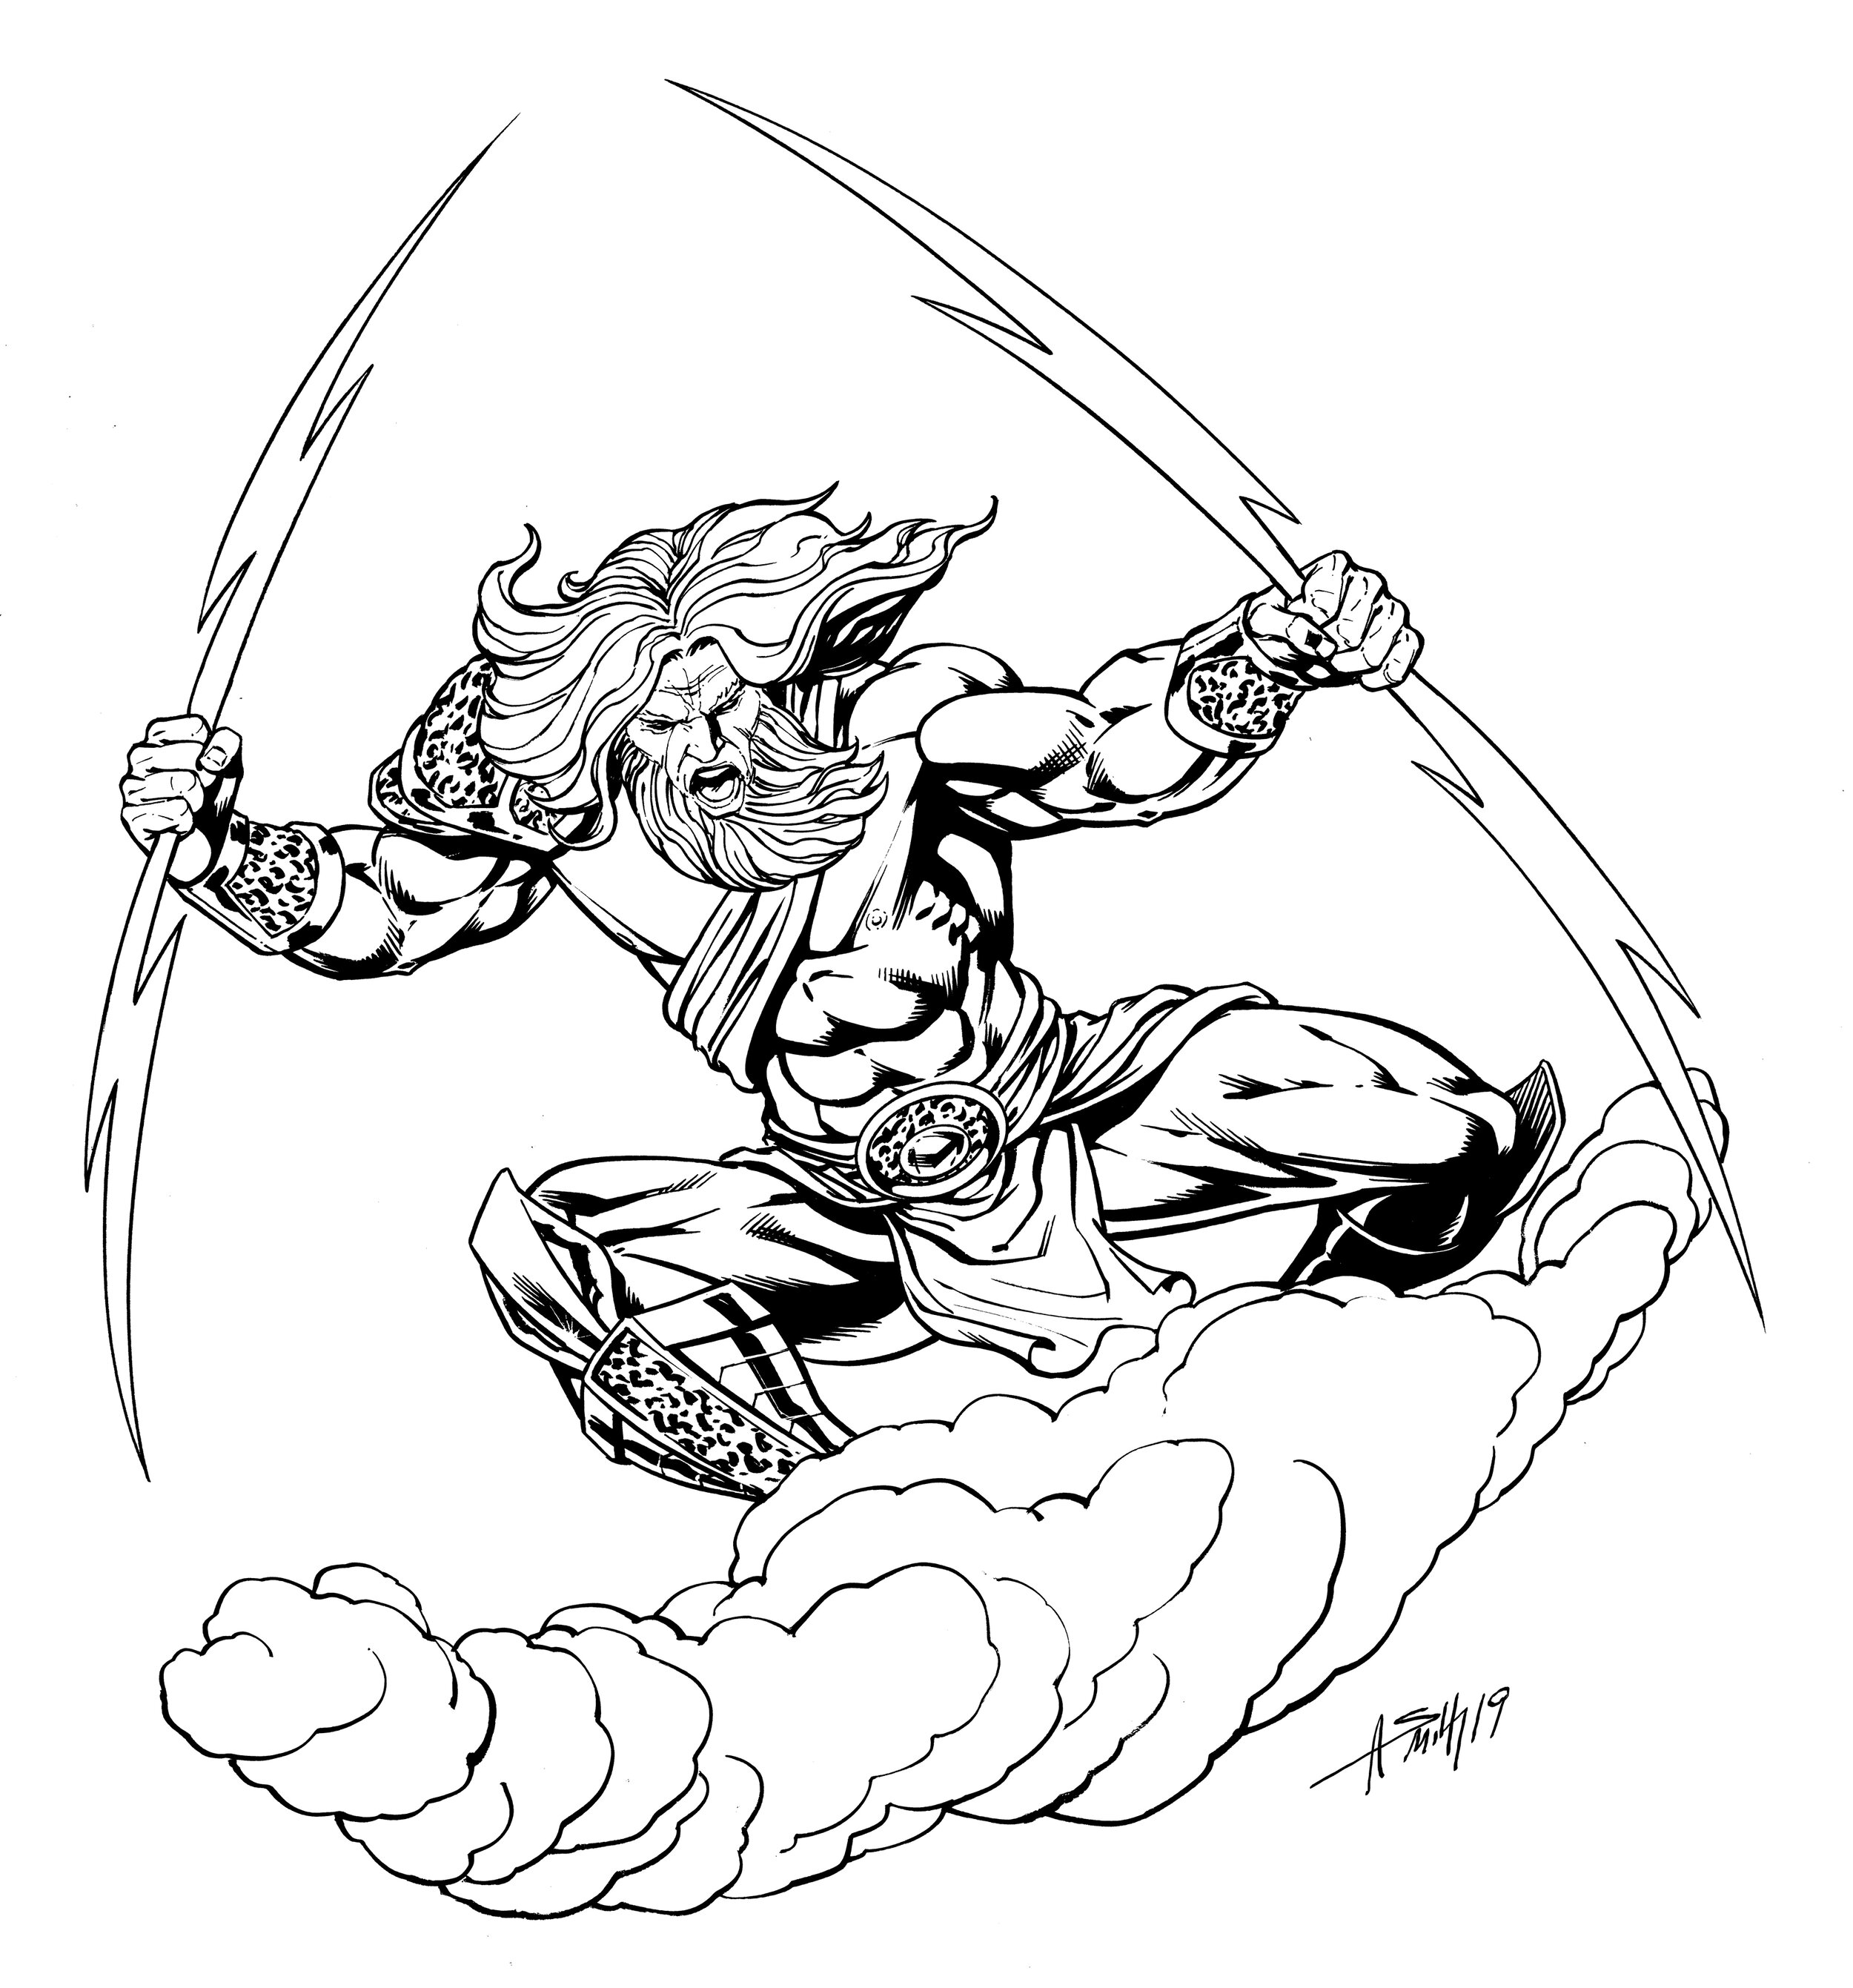 Chargers action pose inks001.jpg